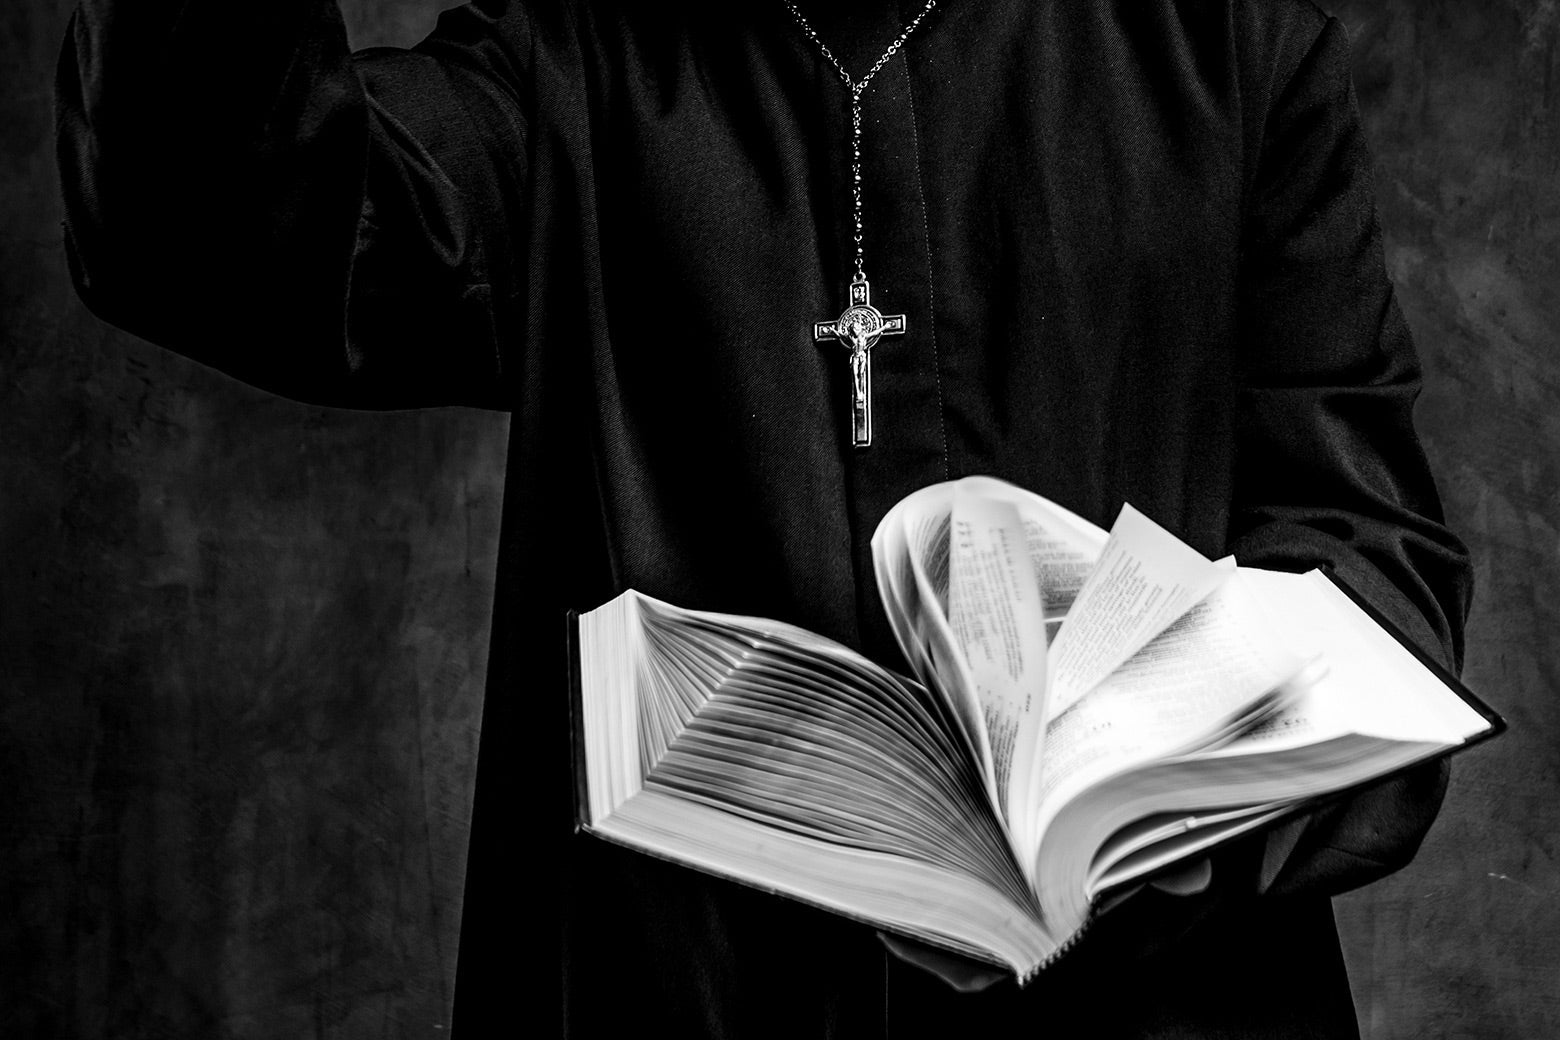 A priest in a black cassock with a crucifix around his neck raising his right arm and holding a Bible open in his left hand